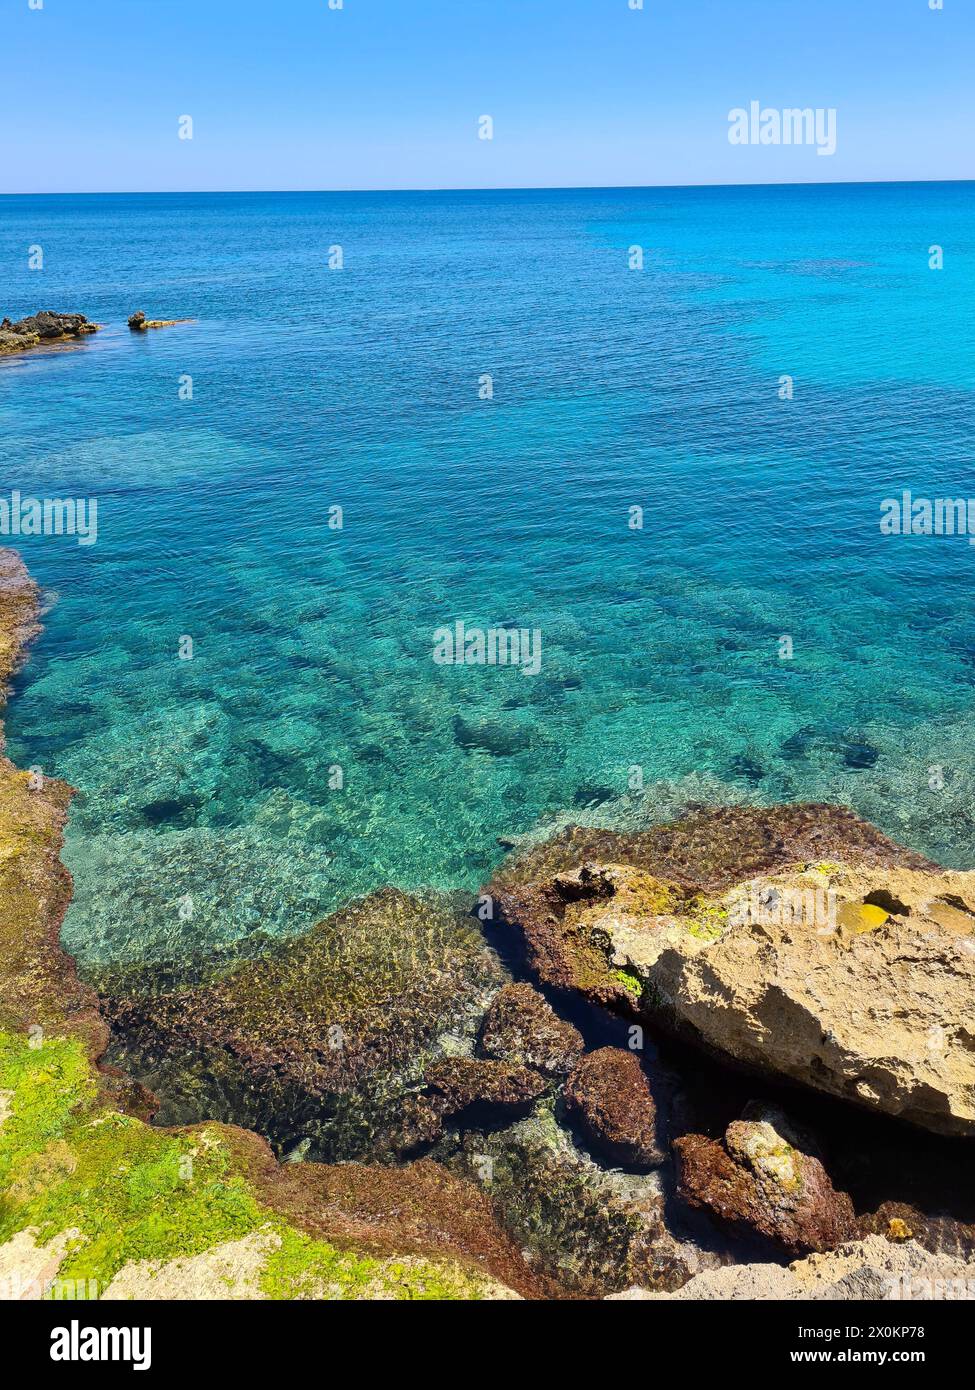 View over the rocks to the turquoise transparent water on the promenade of Cala Ratjada on a beautiful summer's day, Mallorca, Spain Stock Photo